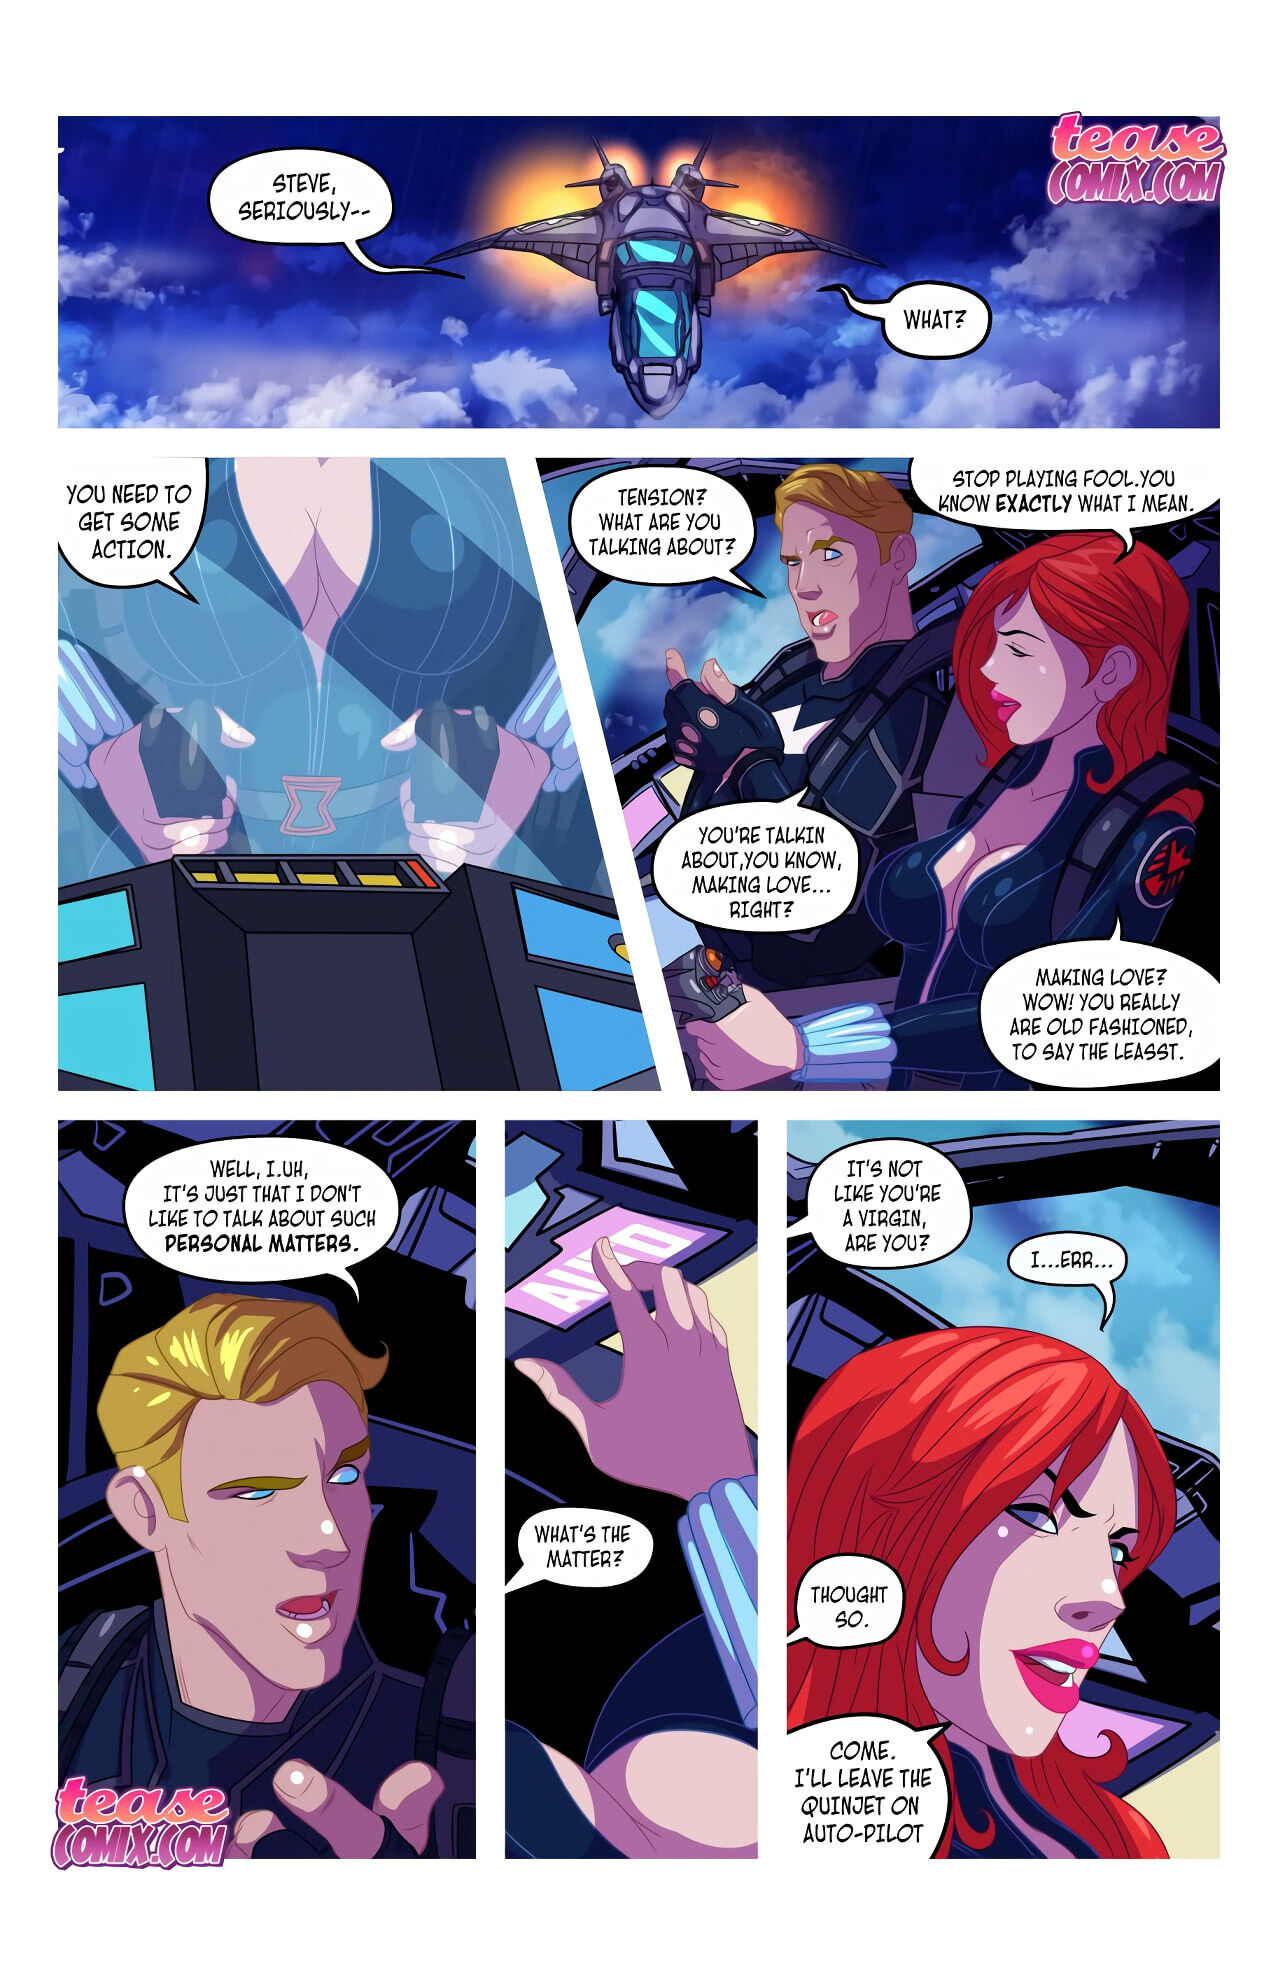 Widow's Downtime - Page 5